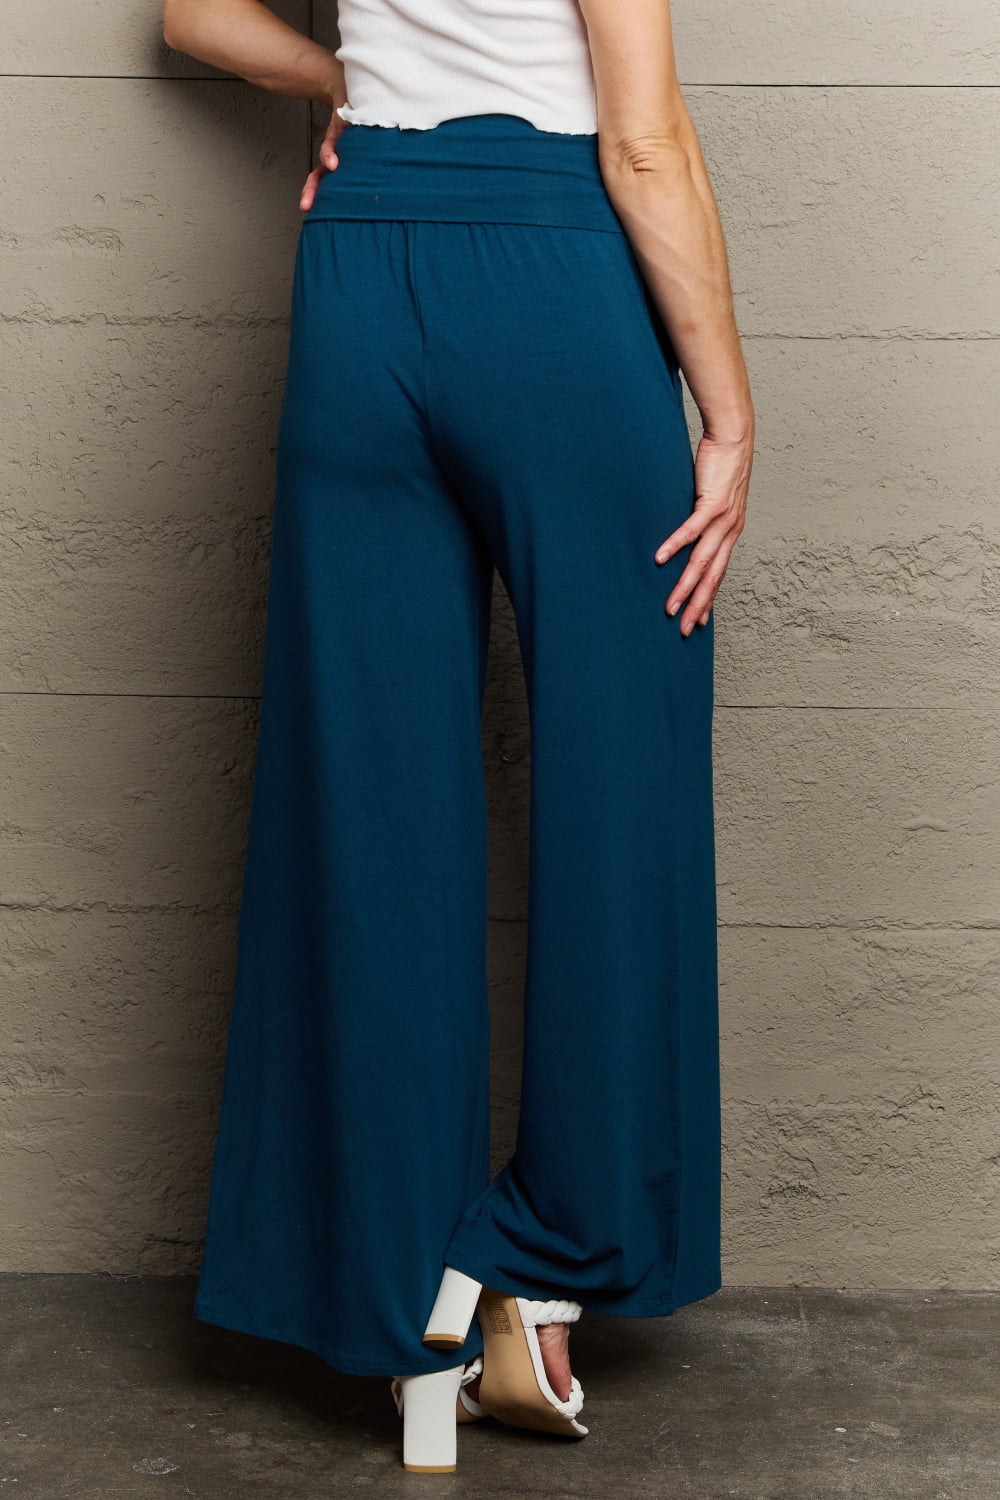 Culture Code My Best Wish Full Size High Waisted Palazzo Pants - Mulberry Skies